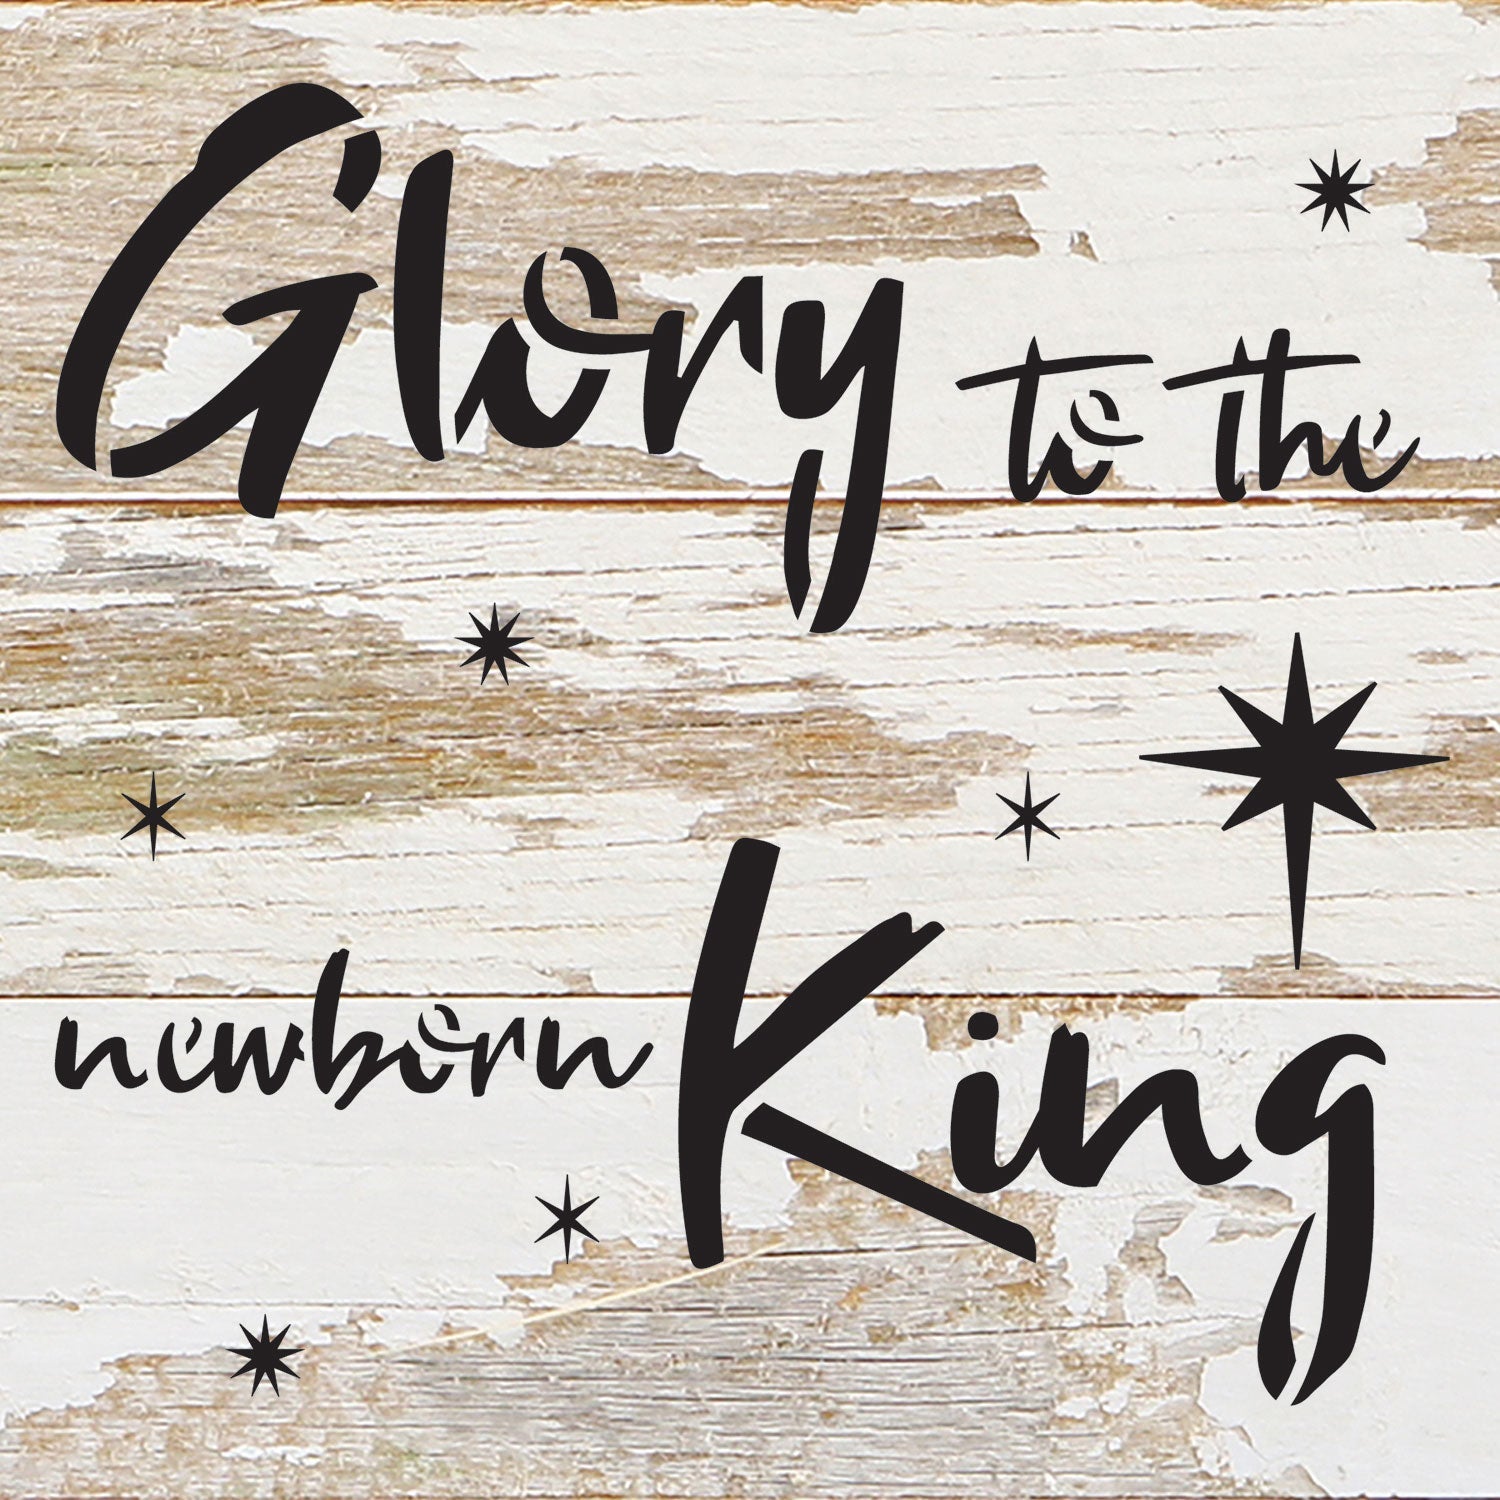 Glory to the newborn King / 6x6 Reclaimed Wood Wall Decor Sign